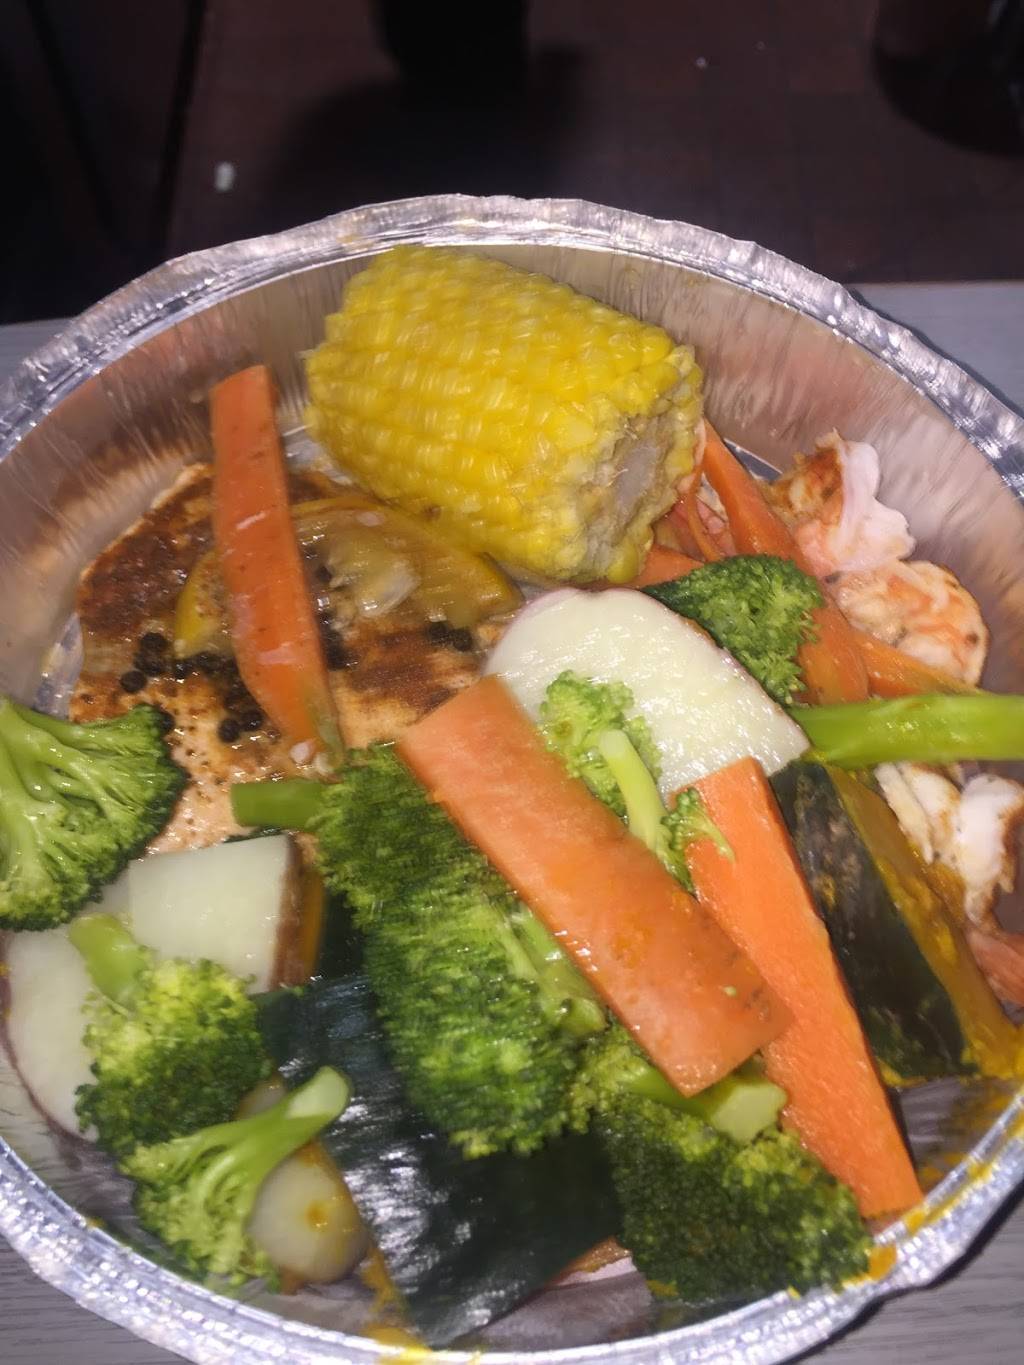 Taystee Seafood Shack | restaurant | 678 Allerton Ave, The Bronx, NY 10467, USA | 7186847778 OR +1 718-684-7778